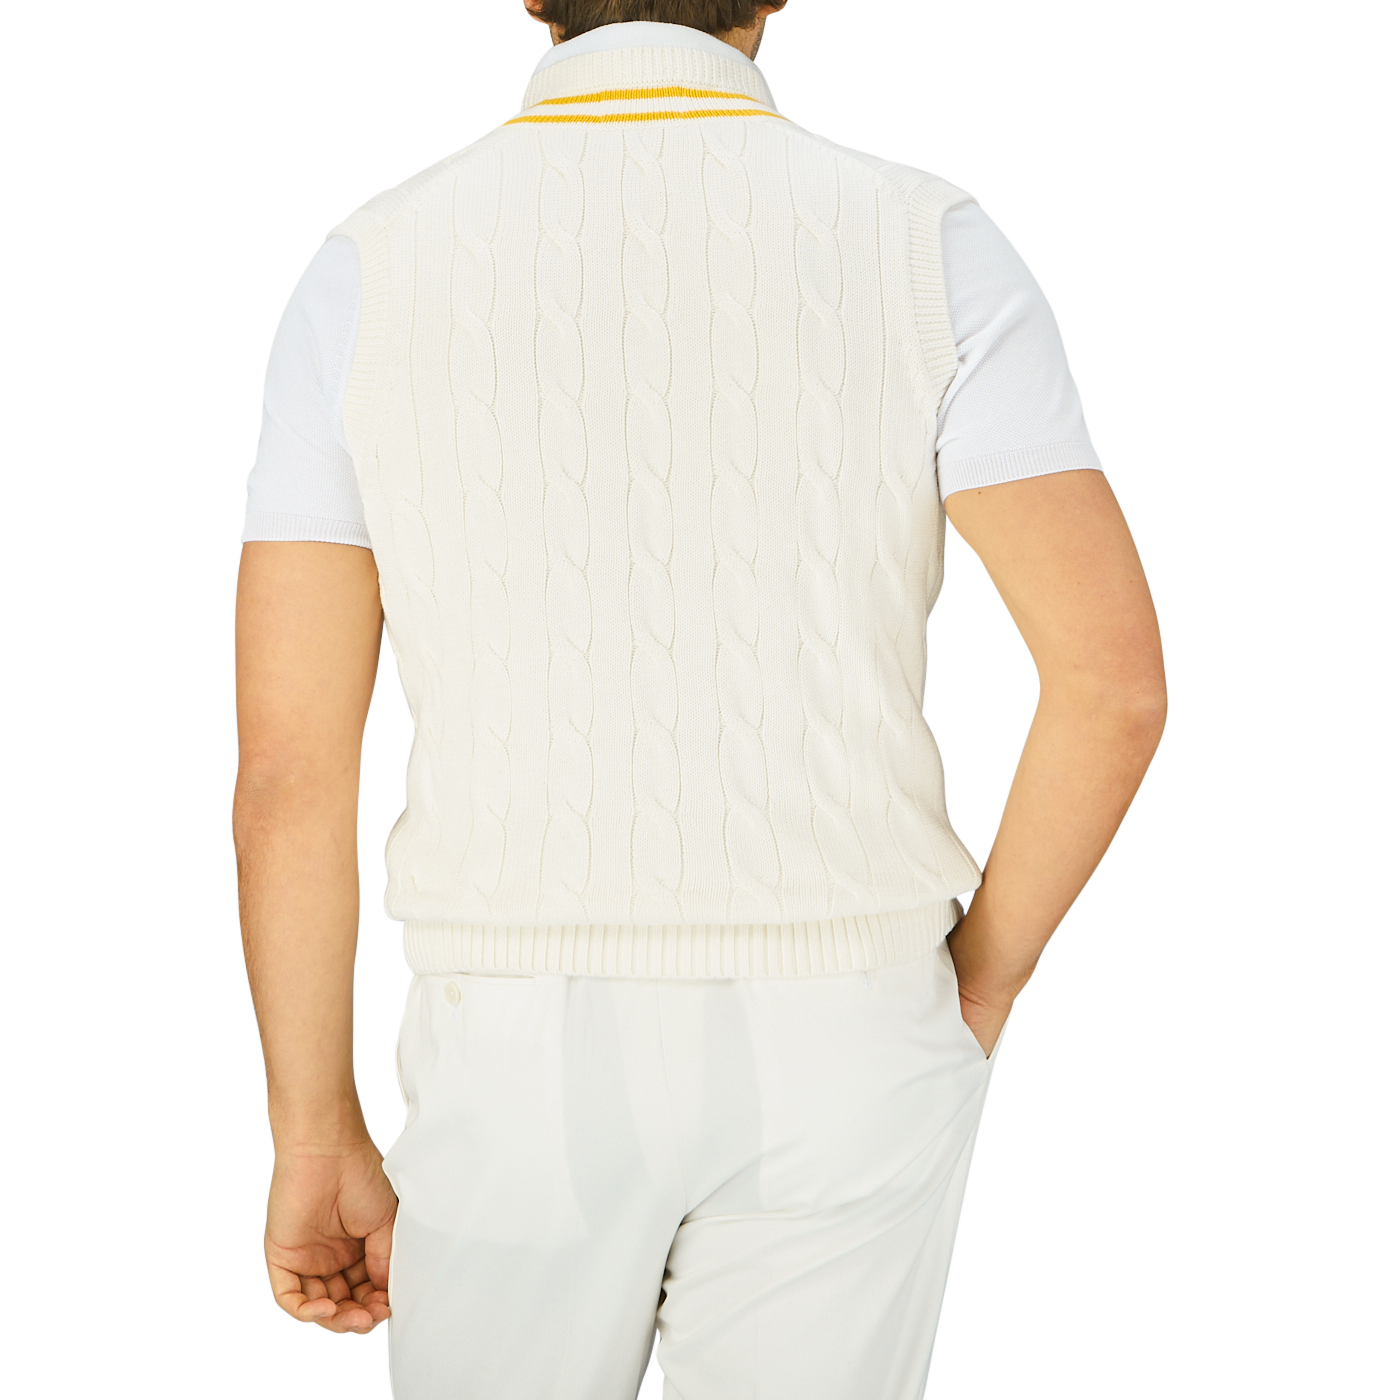 A person seen from behind wearing an Off-White Yellow Striped Cotton Cricket Slipover by Alan Paine and white trousers.